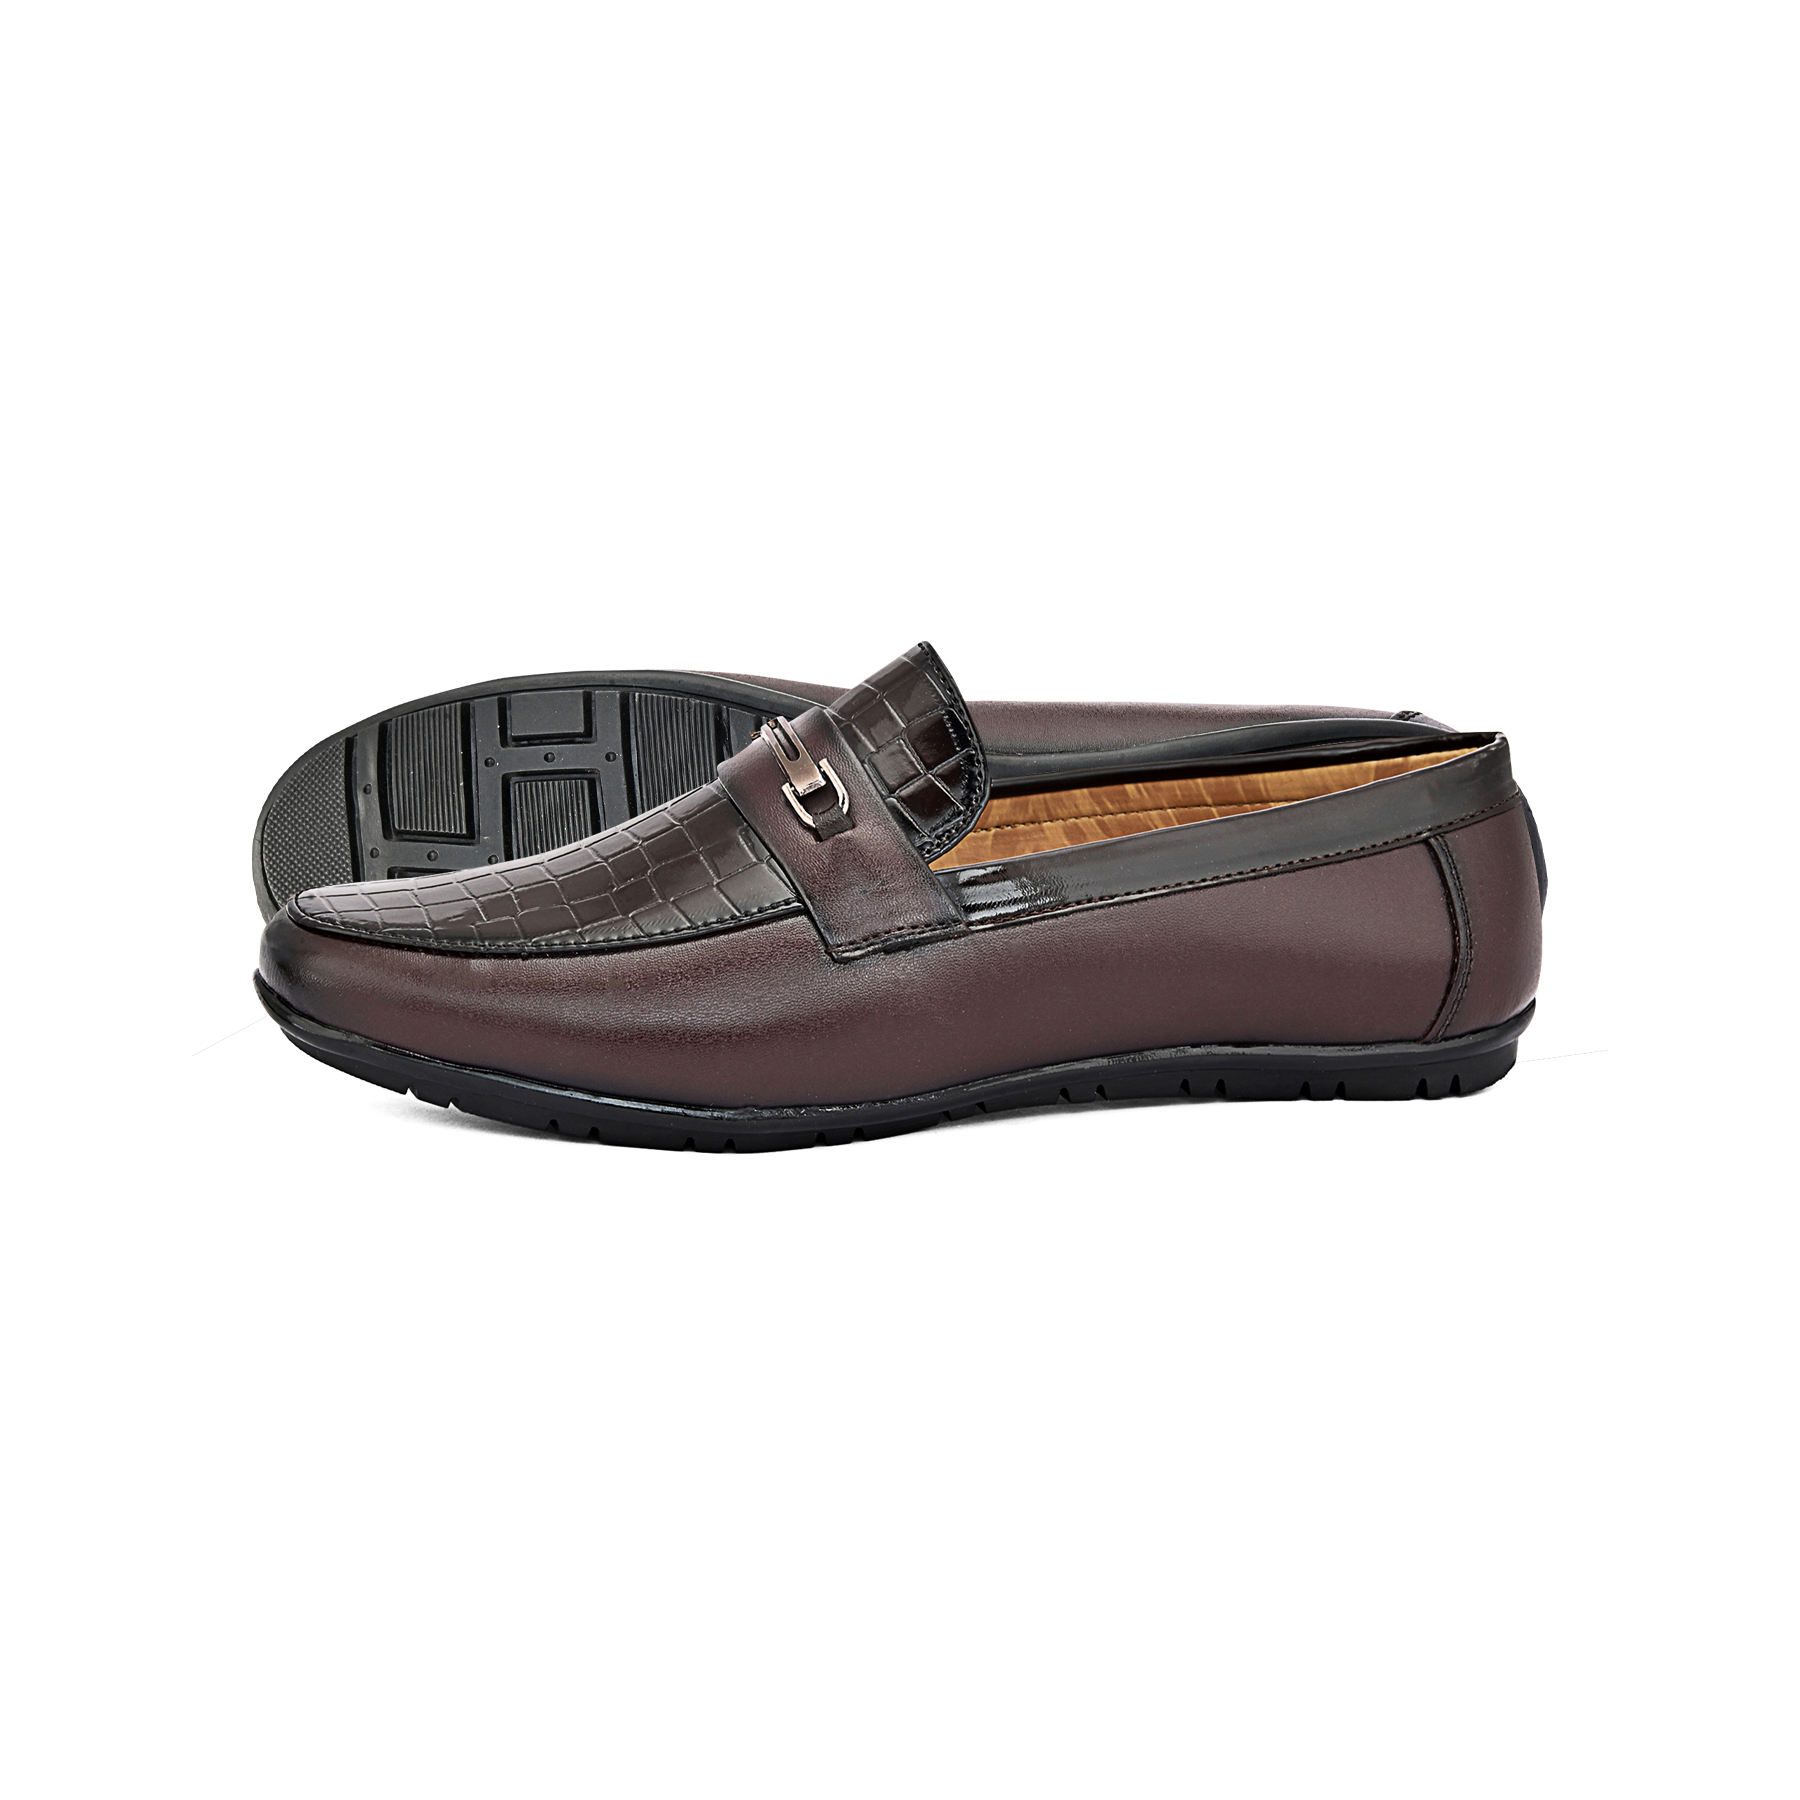 Simba Mocassin Loafer Brown